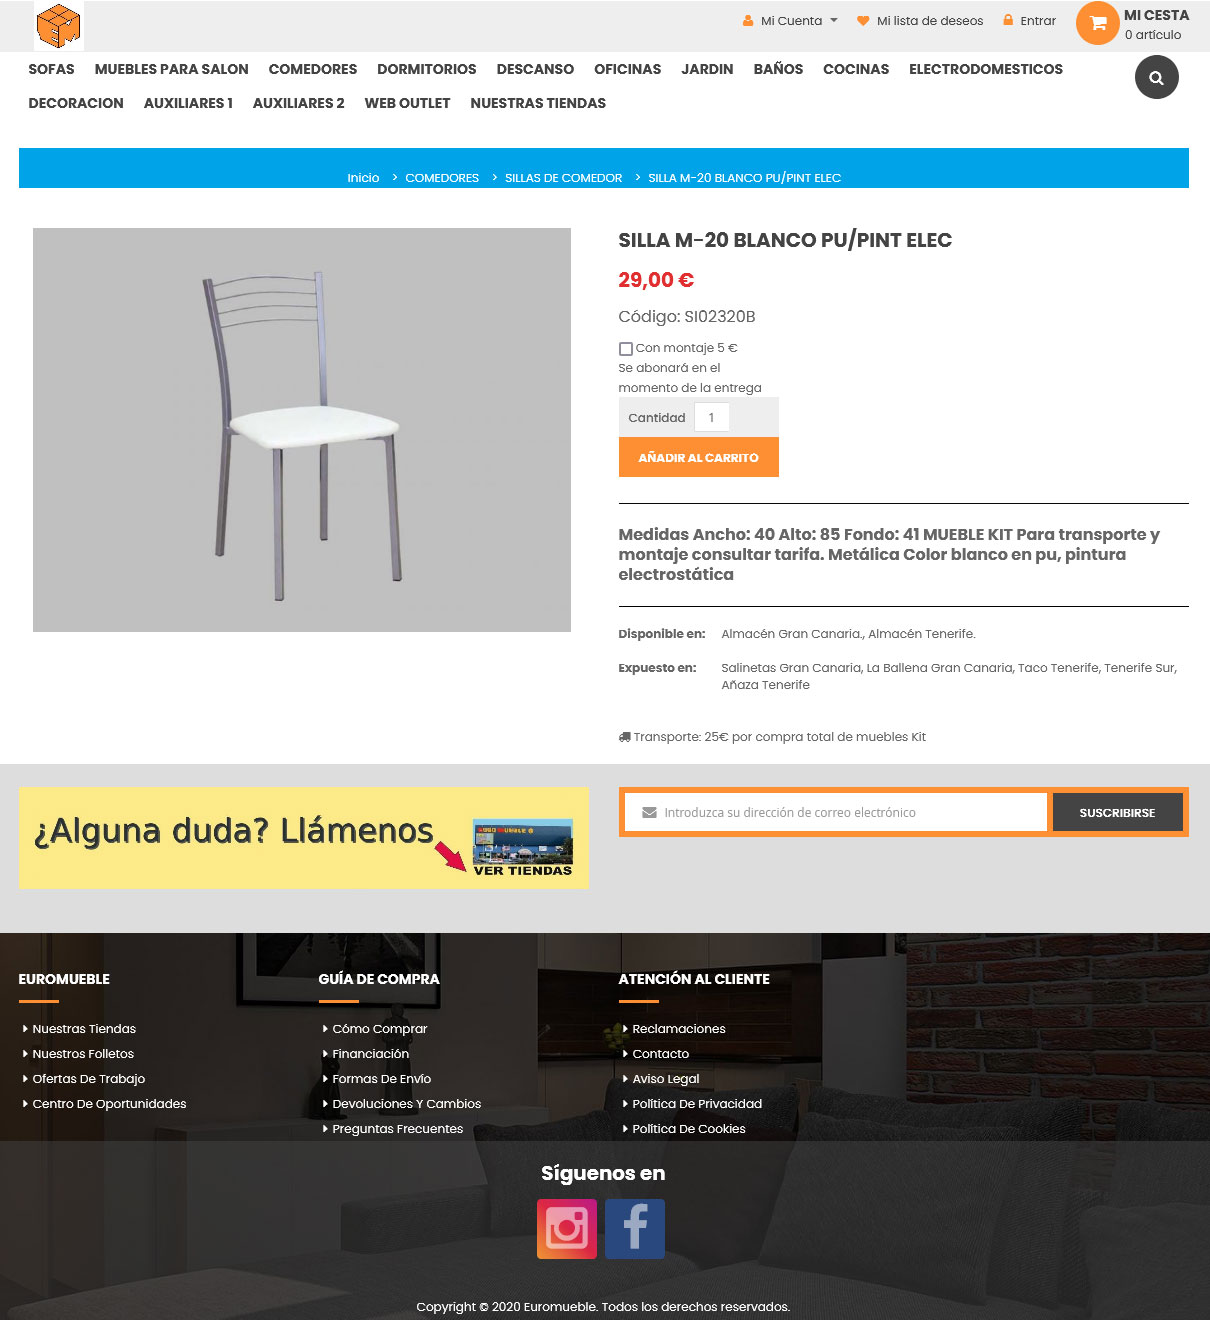 assemble cost option on magento  product details page 